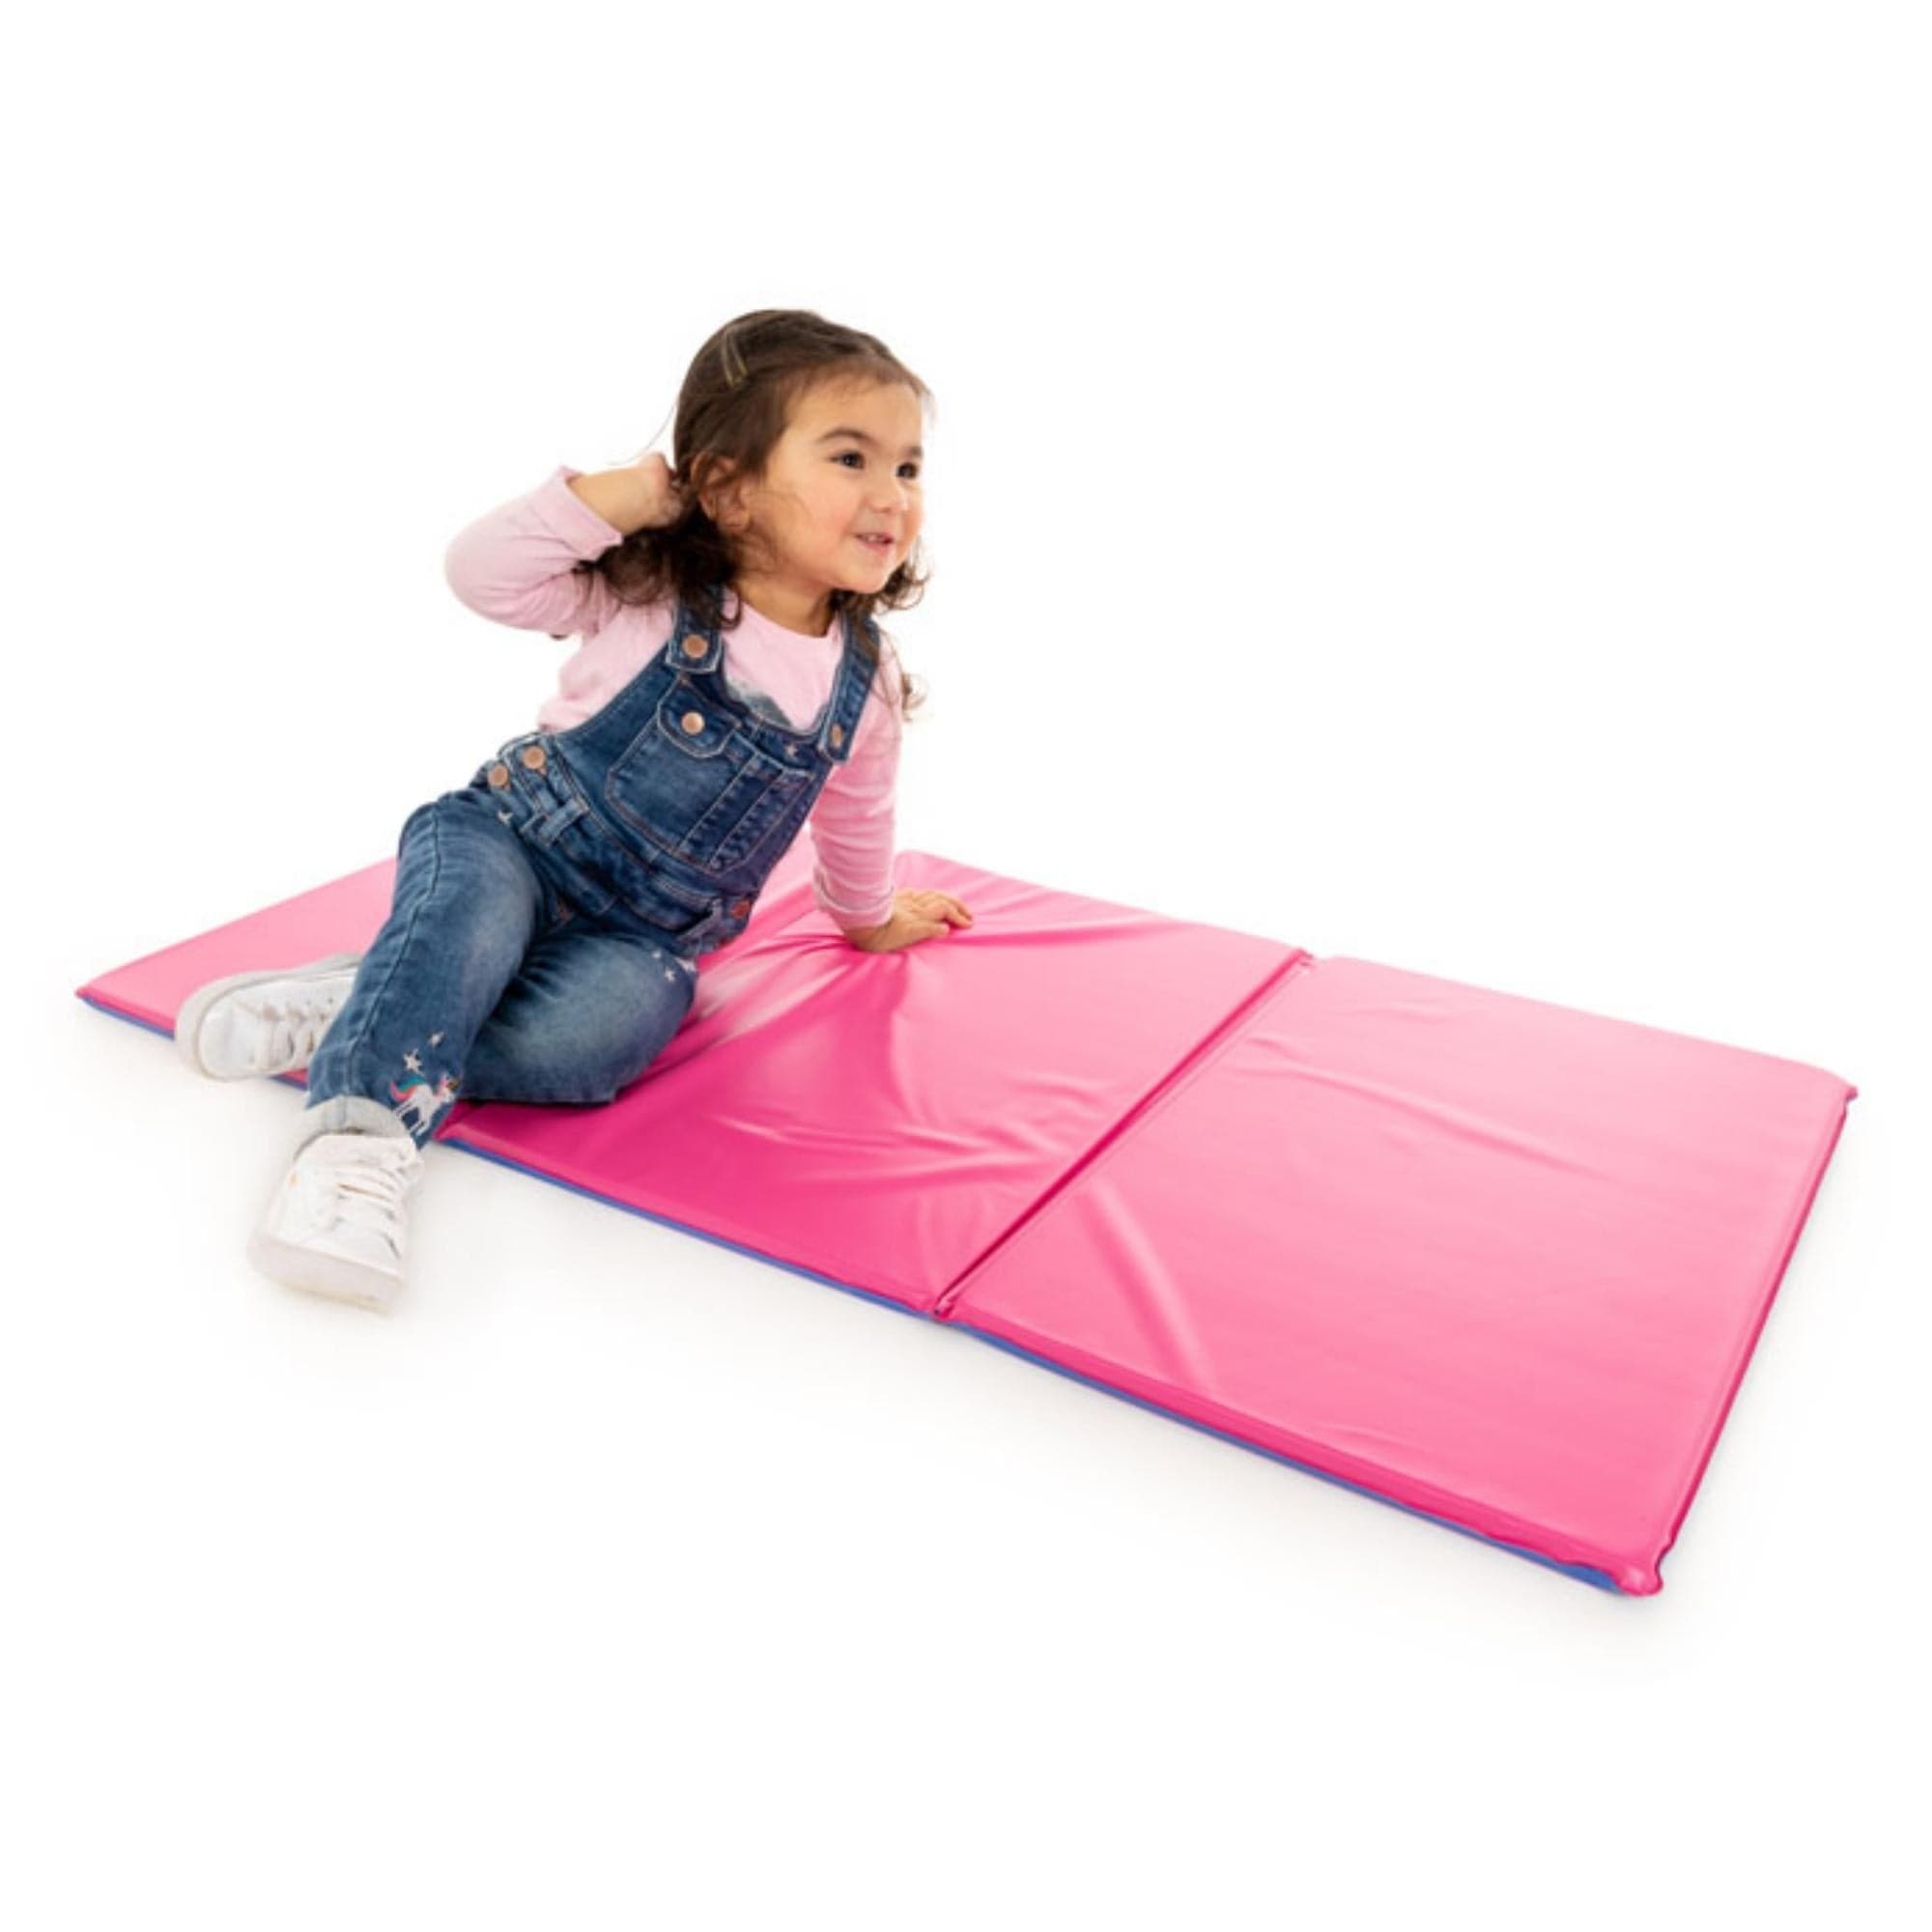 Early Years Value Sleep Mat set of 10 - Pink and Blue, The Early Years Value Sleep Mat Set of 10 – Comfort and Convenience for Nursery Naps! Our Early Years Value Sleep Mat Set of 10 is carefully designed to provide the utmost comfort and convenience for nursery children during daytime naps. Here's why this set is an excellent choice for ensuring peaceful and comfortable rest: Soft and Comfortable: These sleep mats feature an especially soft surface and mattress filling, offering a cozy and comfortable rest